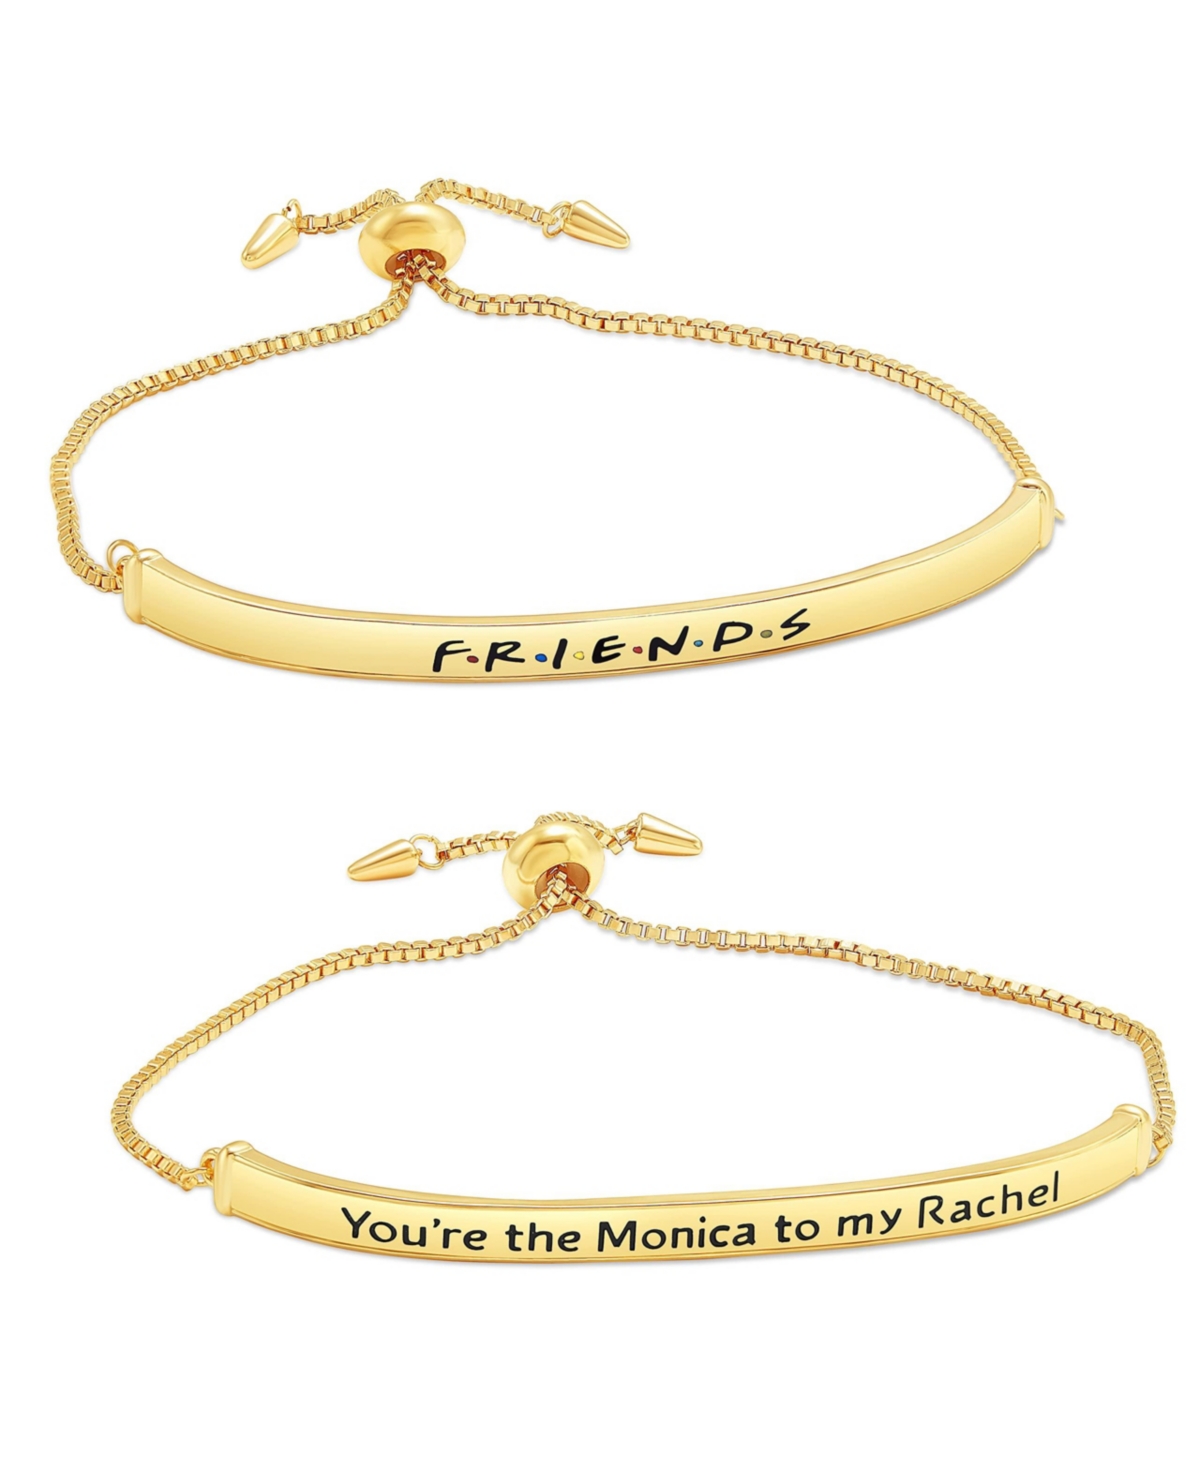 Tv Show Themed Gold Plated Bar Bracelets, Logo and You're the Monica to my Rachel - Set of 2 - Gold tone